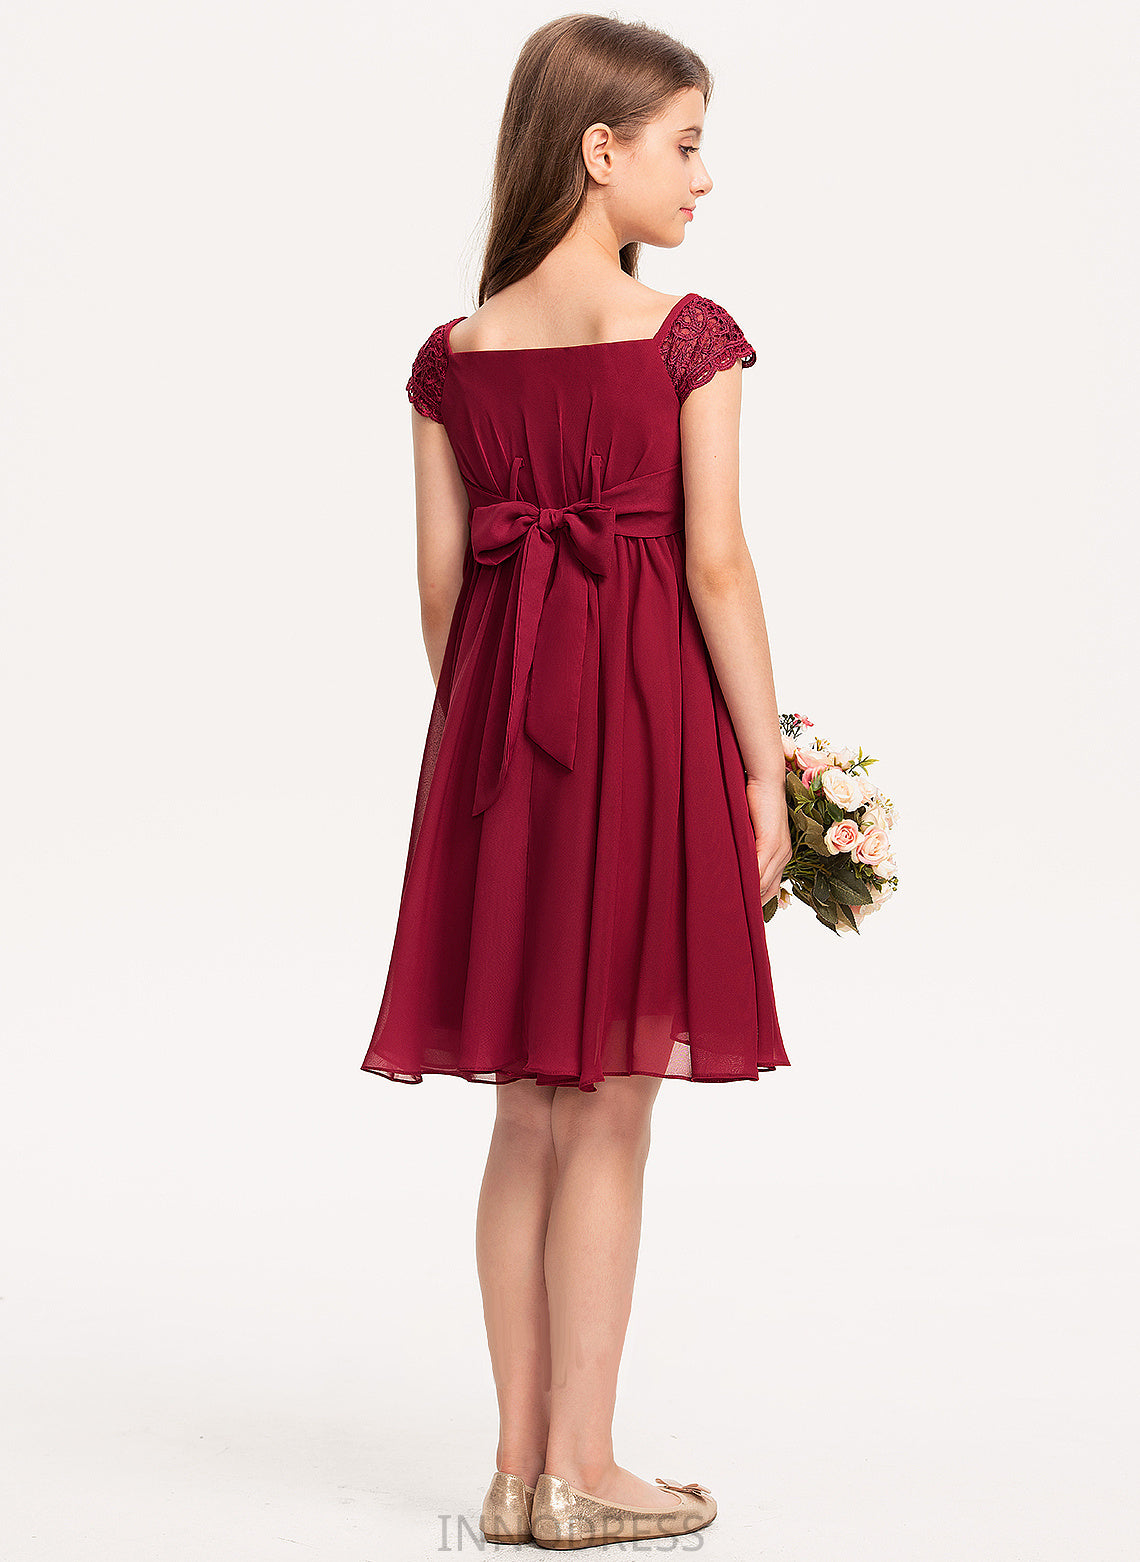 With Off-the-Shoulder Junior Bridesmaid Dresses Madalyn A-Line Chiffon Bow(s) Knee-Length Lace